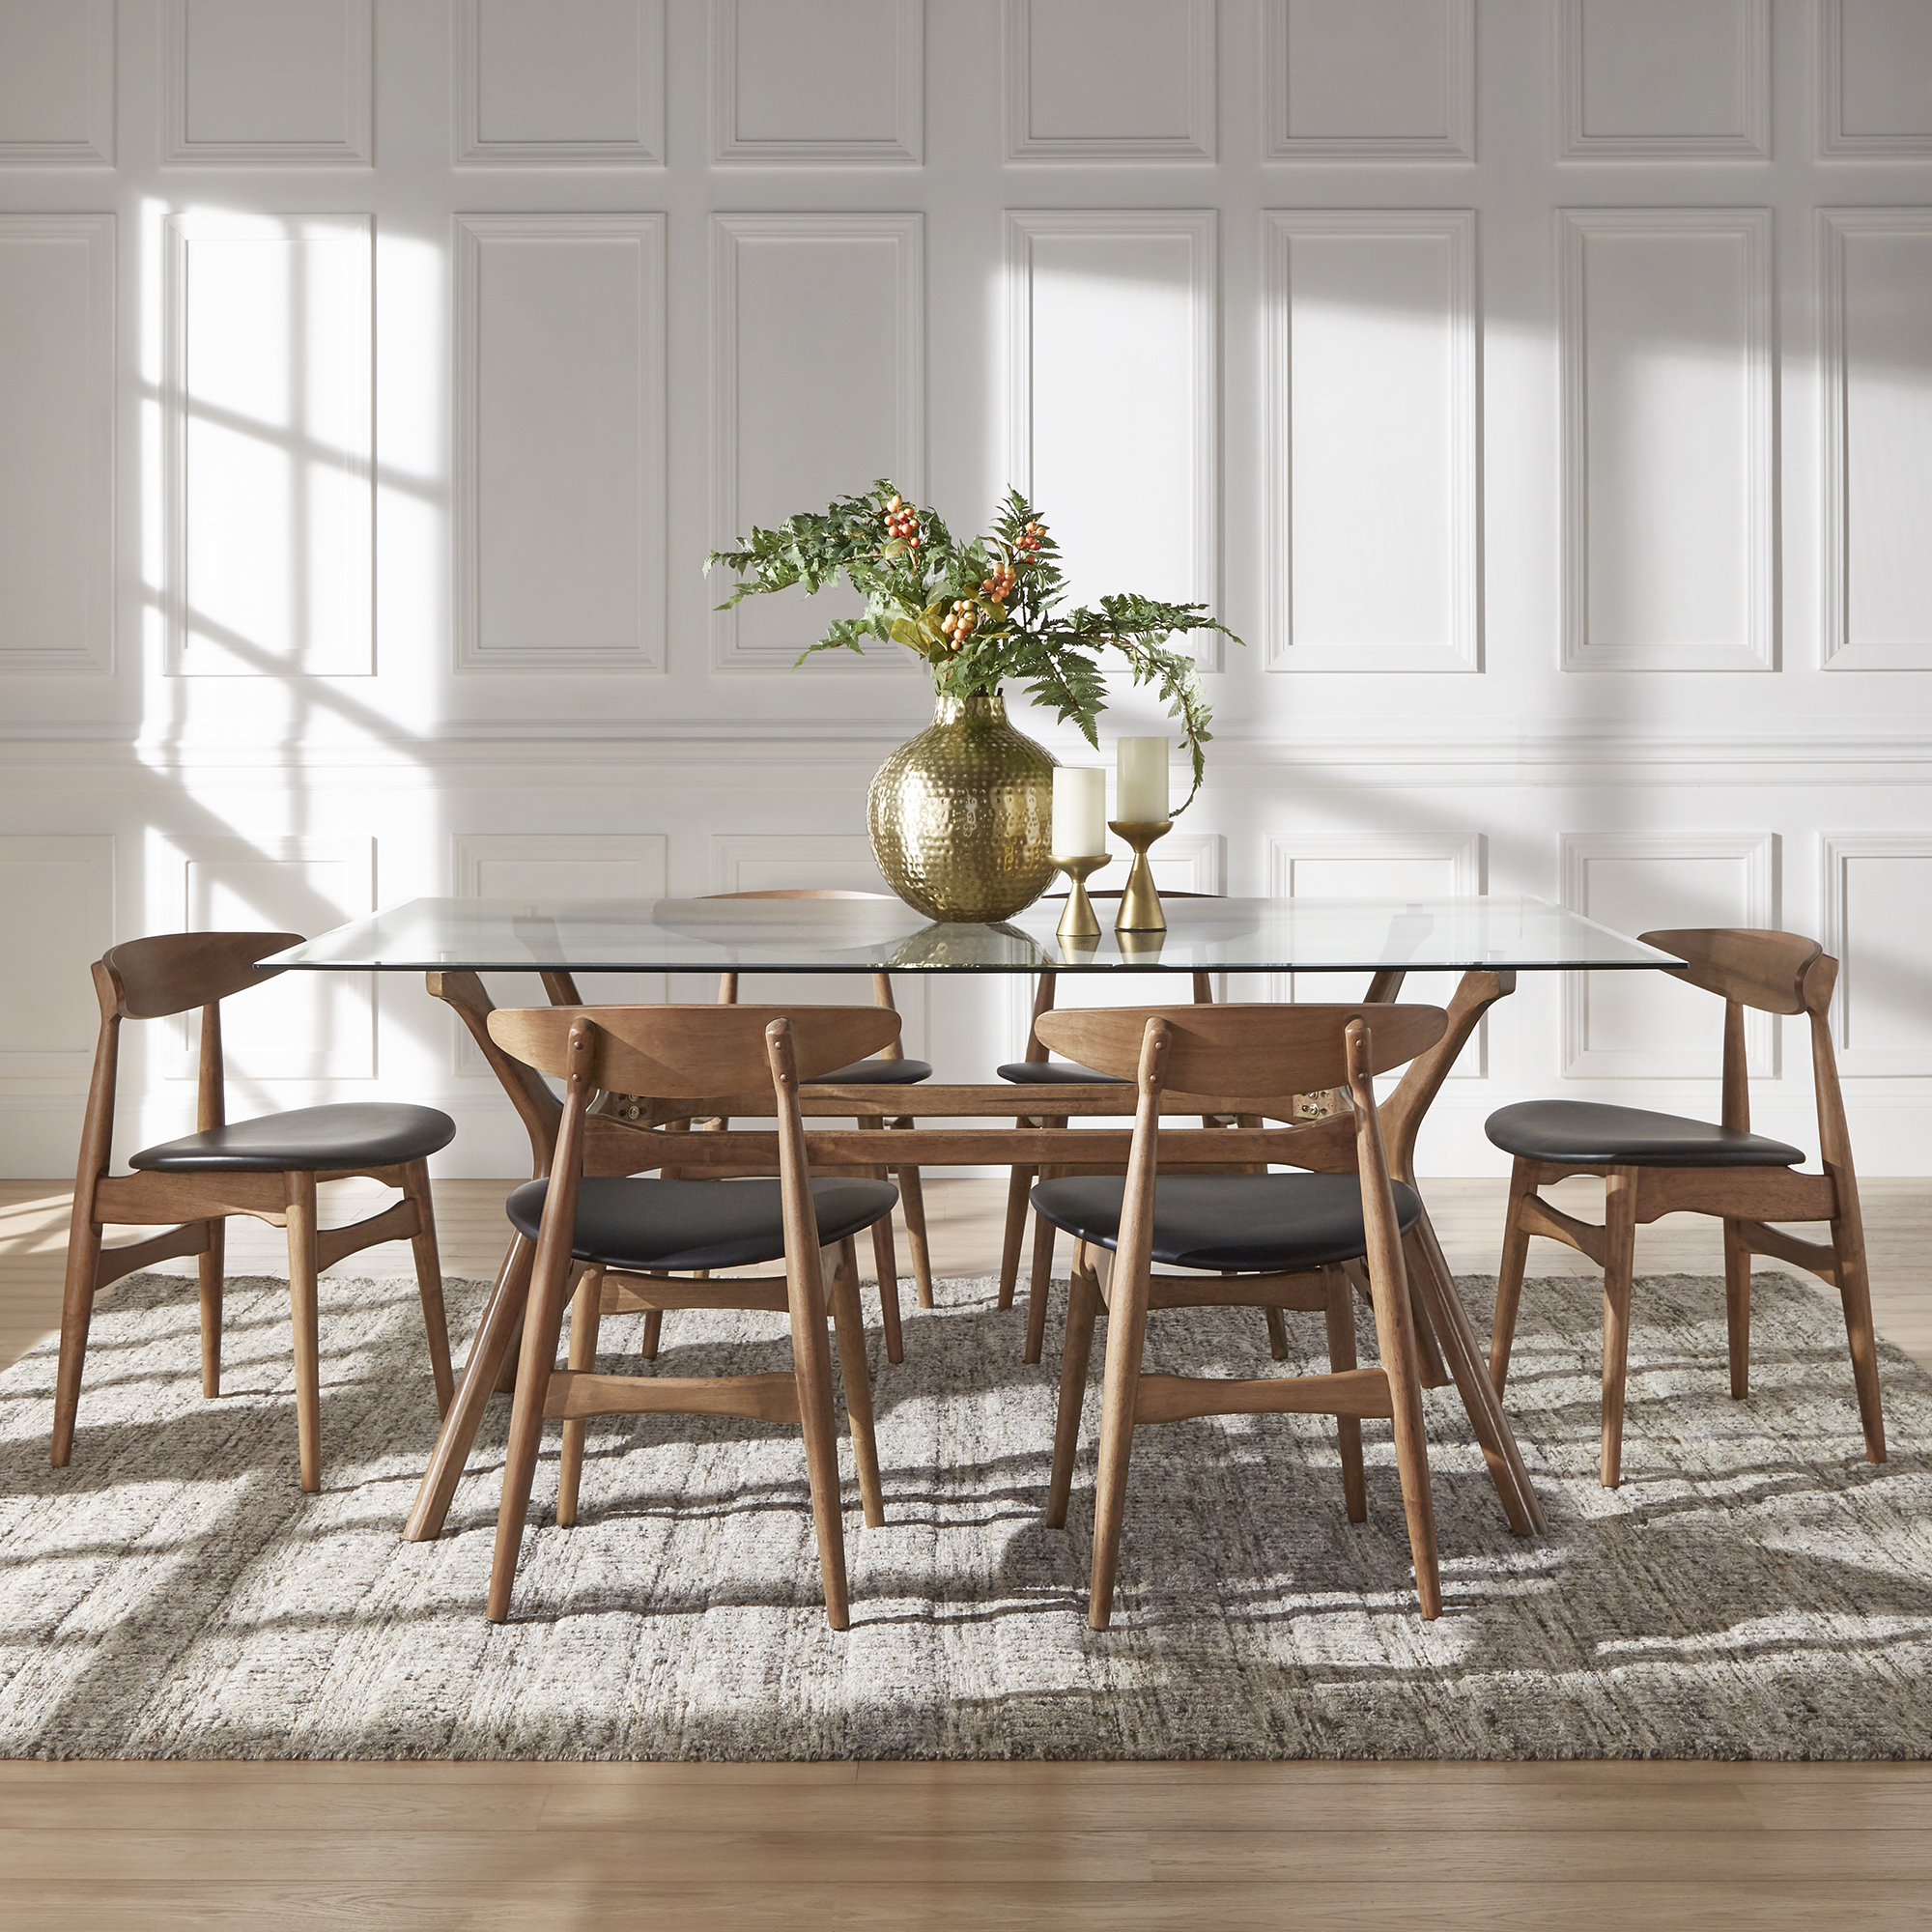 This is a mid-century modern inspiring dining combination. Taking cues from Scandinavian style, this set includes a glass top rectangular dining table. The dining chairs have curved backs, natural wood grain finishes, and black upholstered seats.